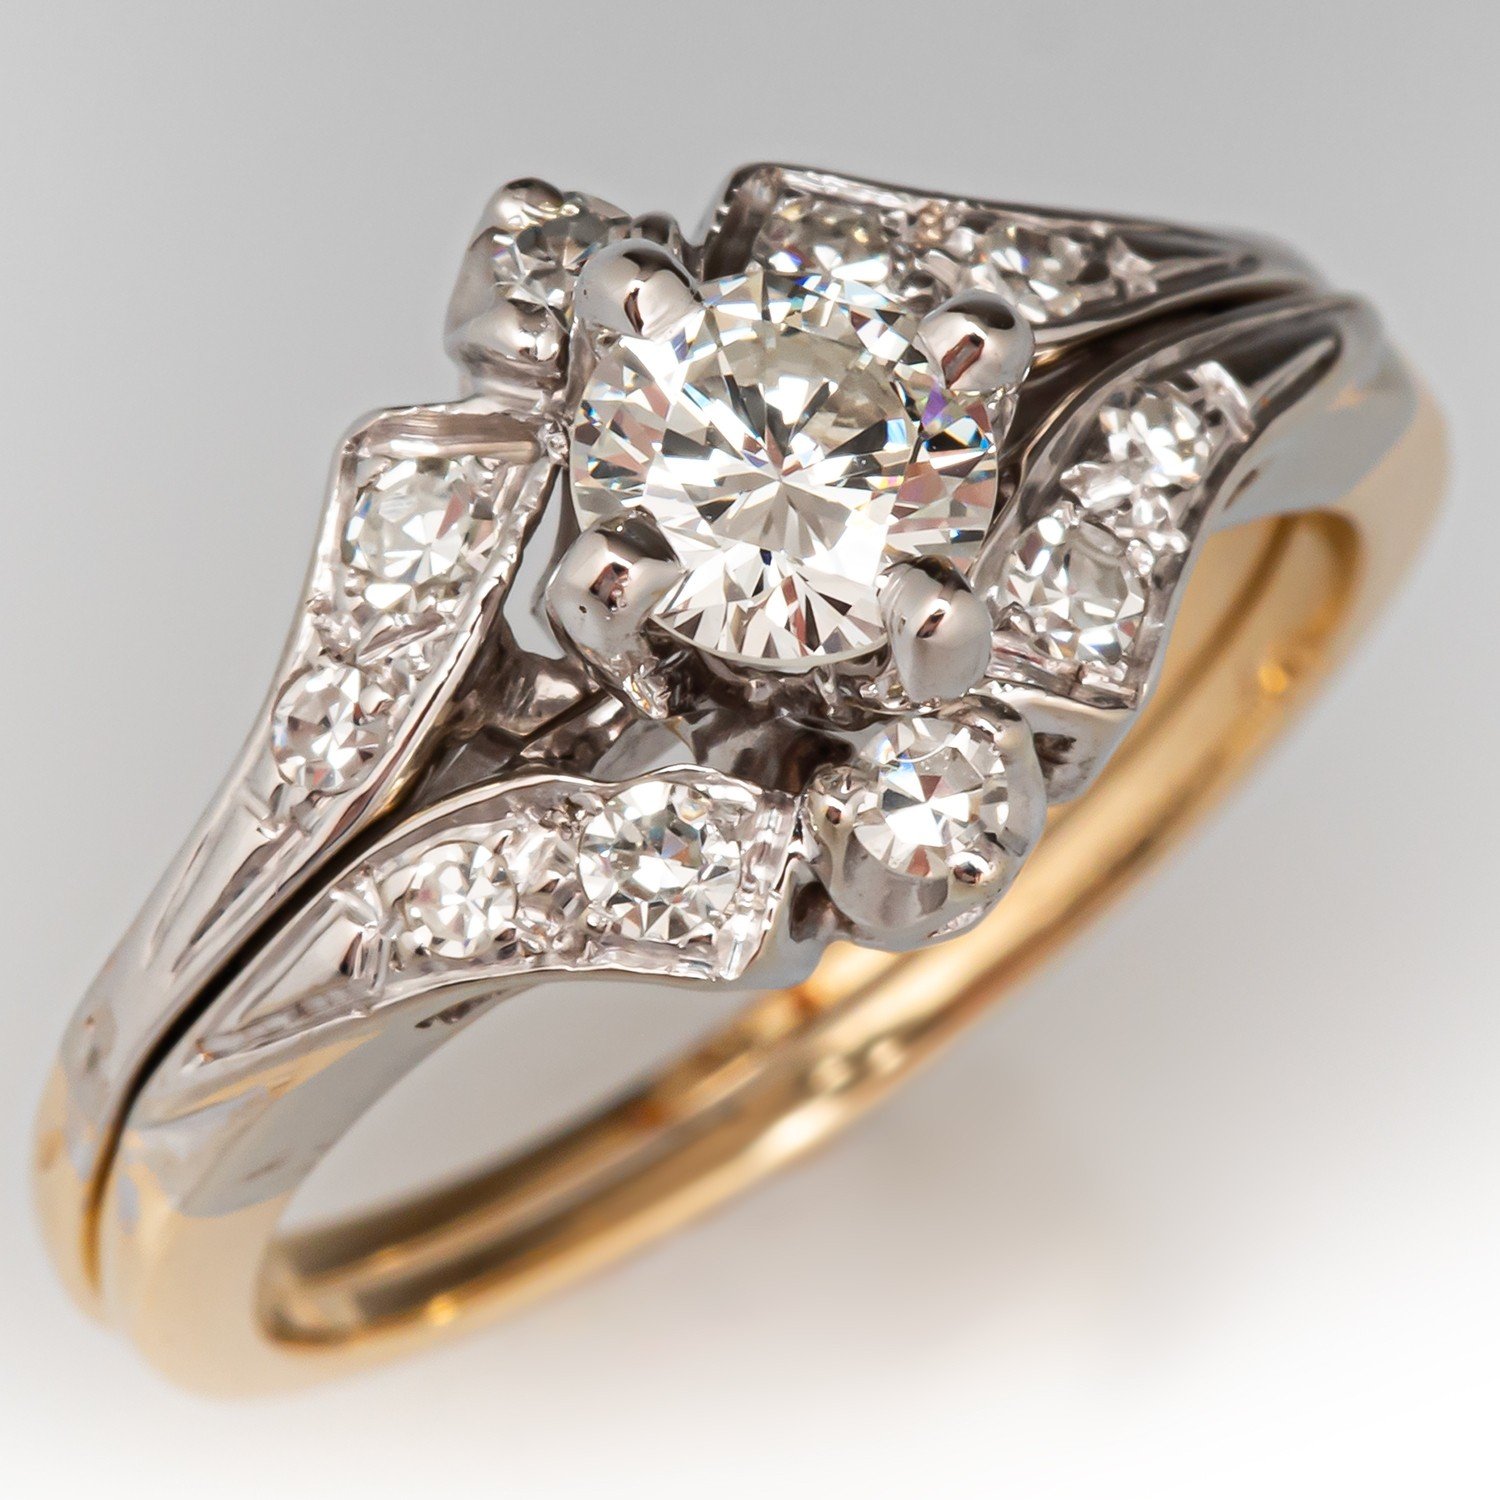 Wedding Ring Appraisal 101: Everything You Need to Know